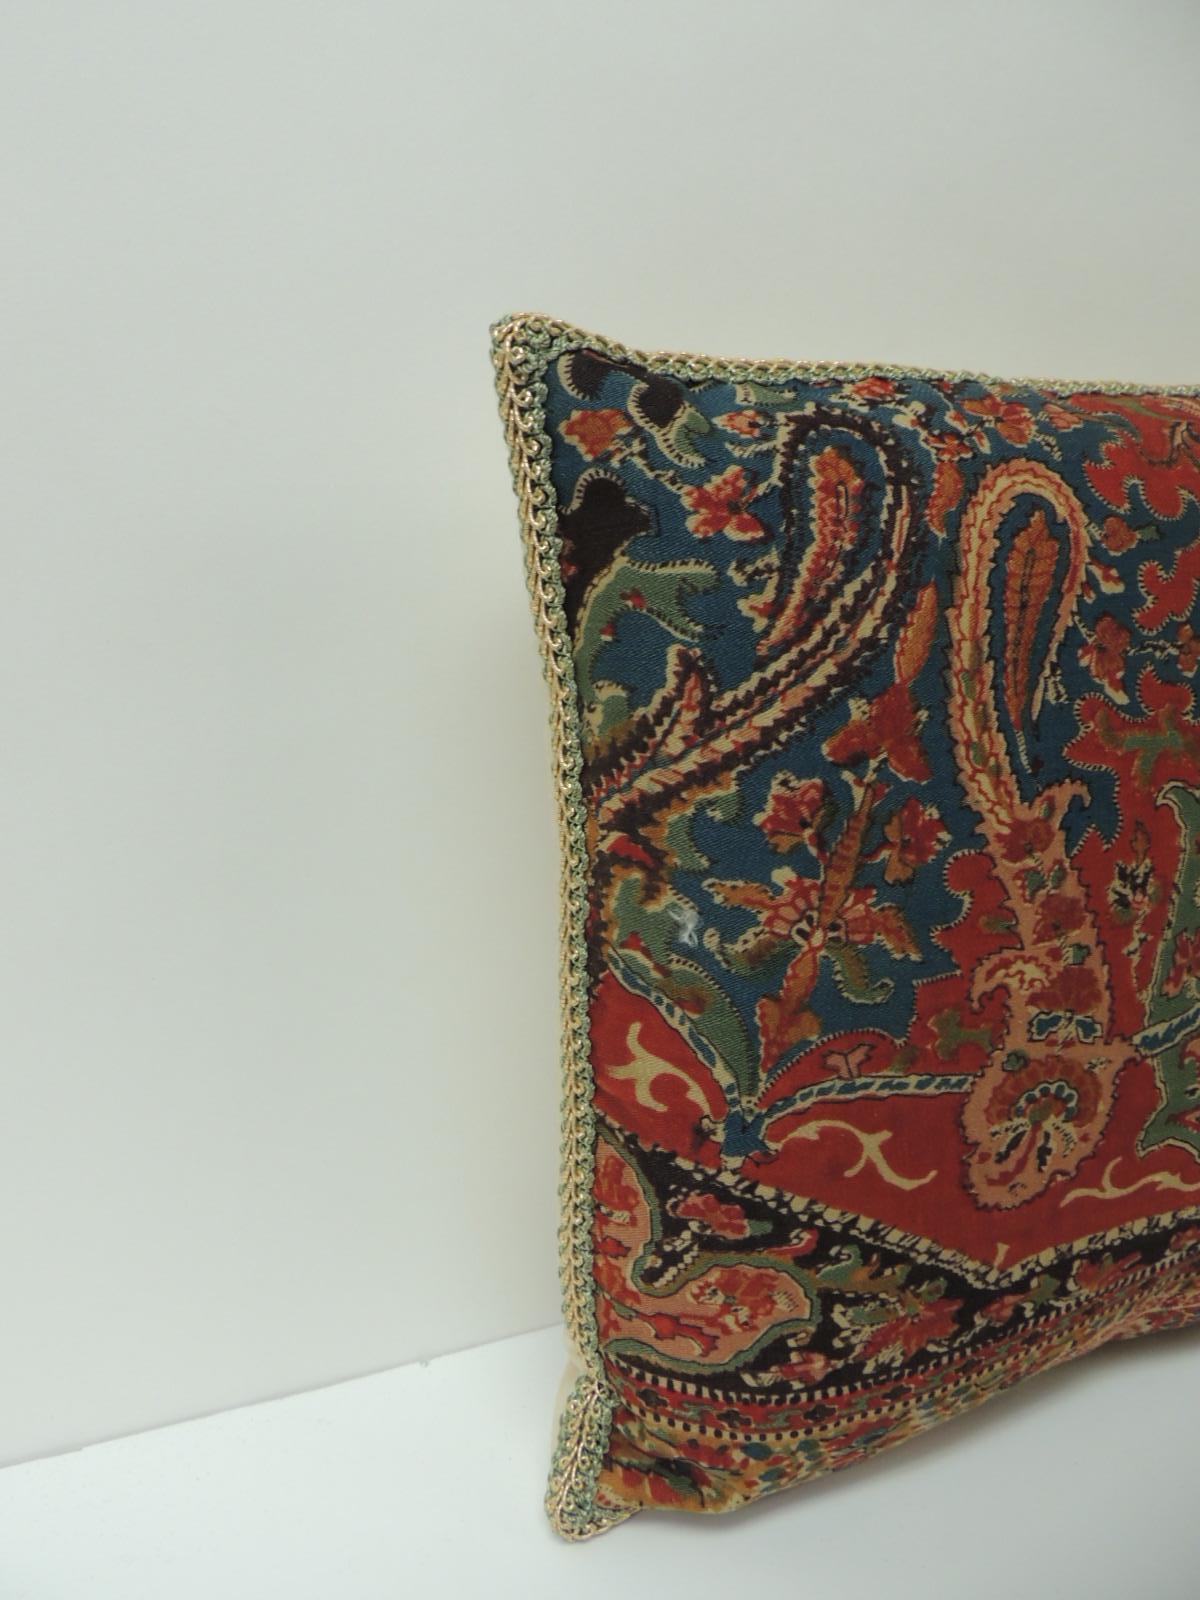 Petite Kashmir paisley silk red textile pillows from India. Sericulture and tweed weaving are one of the major industries in Kashmir. Interestingly, just as little or no raw-material for tweed comes from Kashmir, the same way almost no weaving and